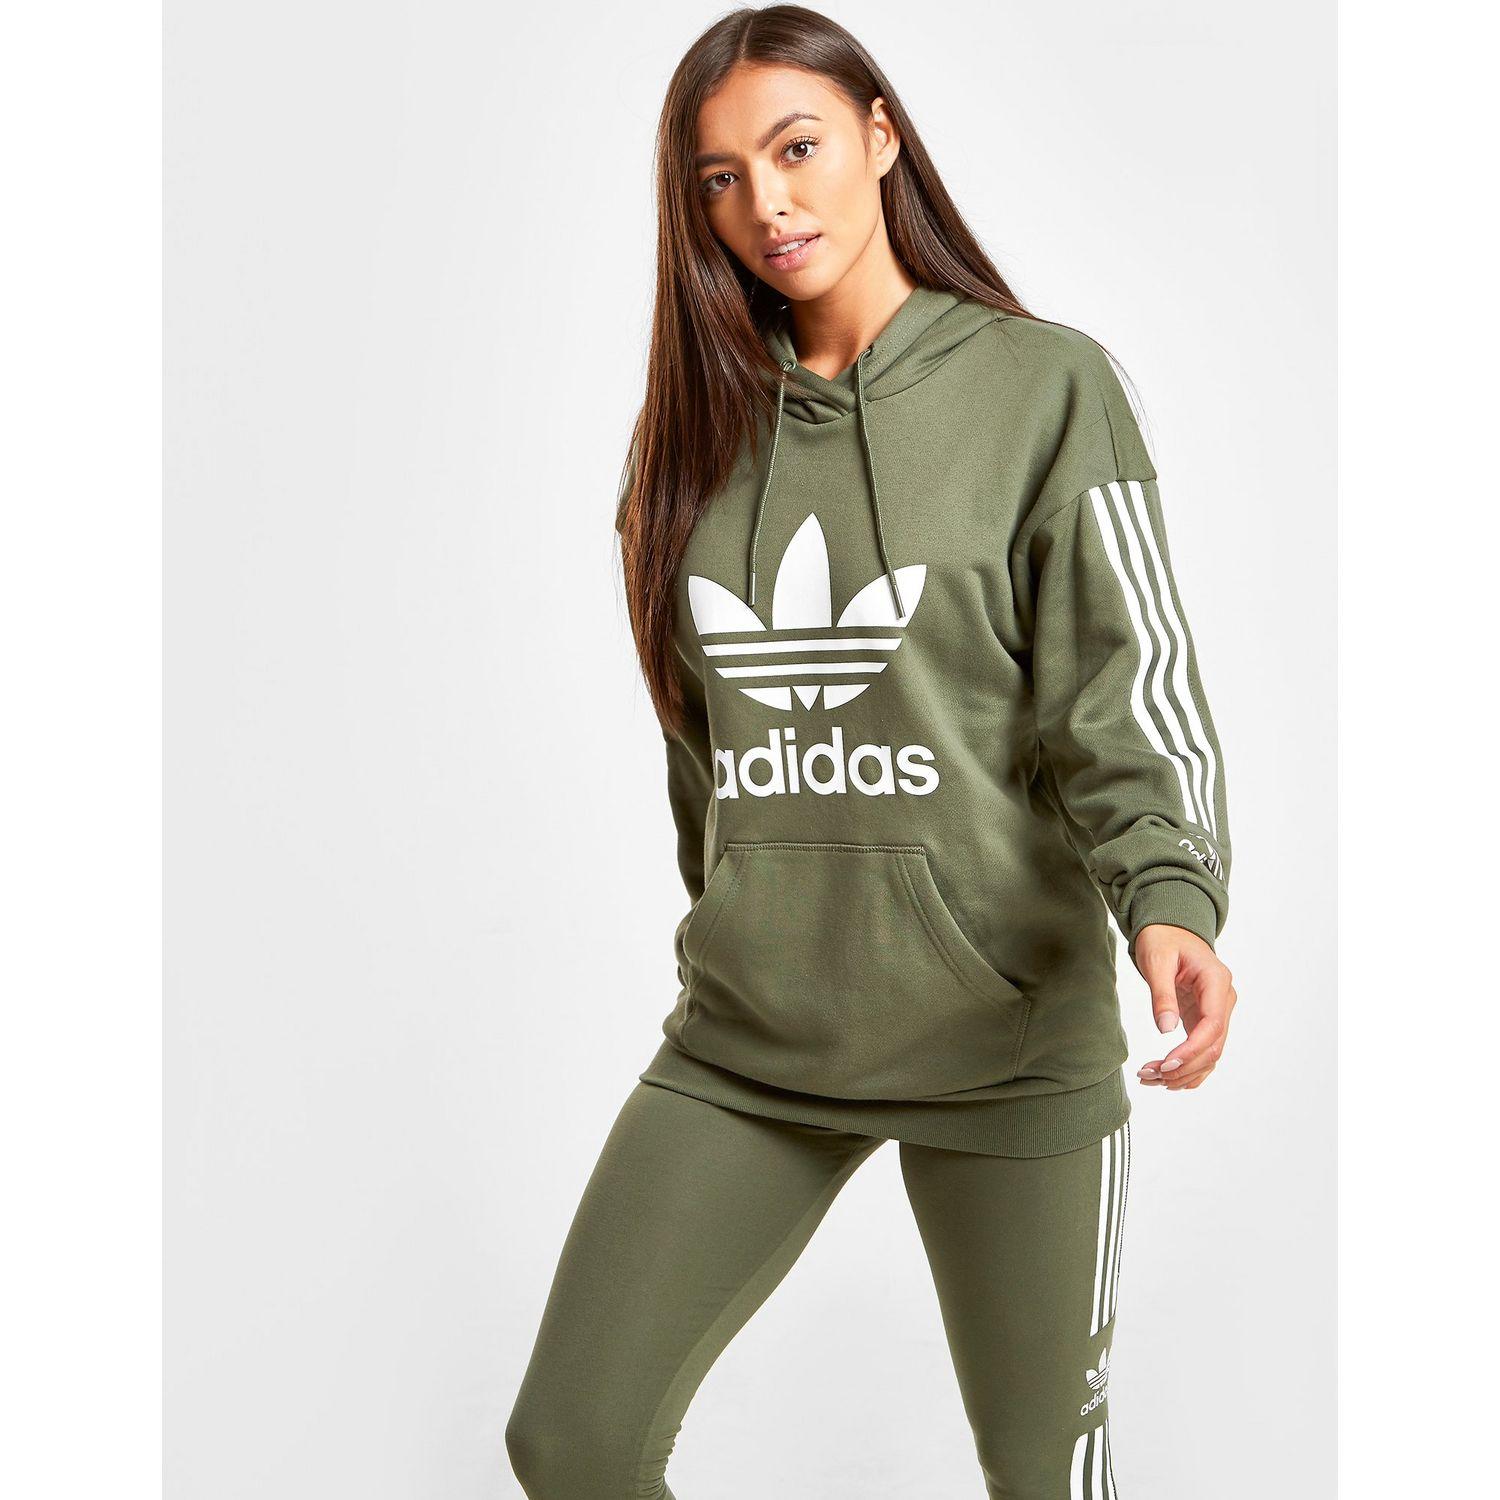 adidas originals a2k hoodie in khaki and white